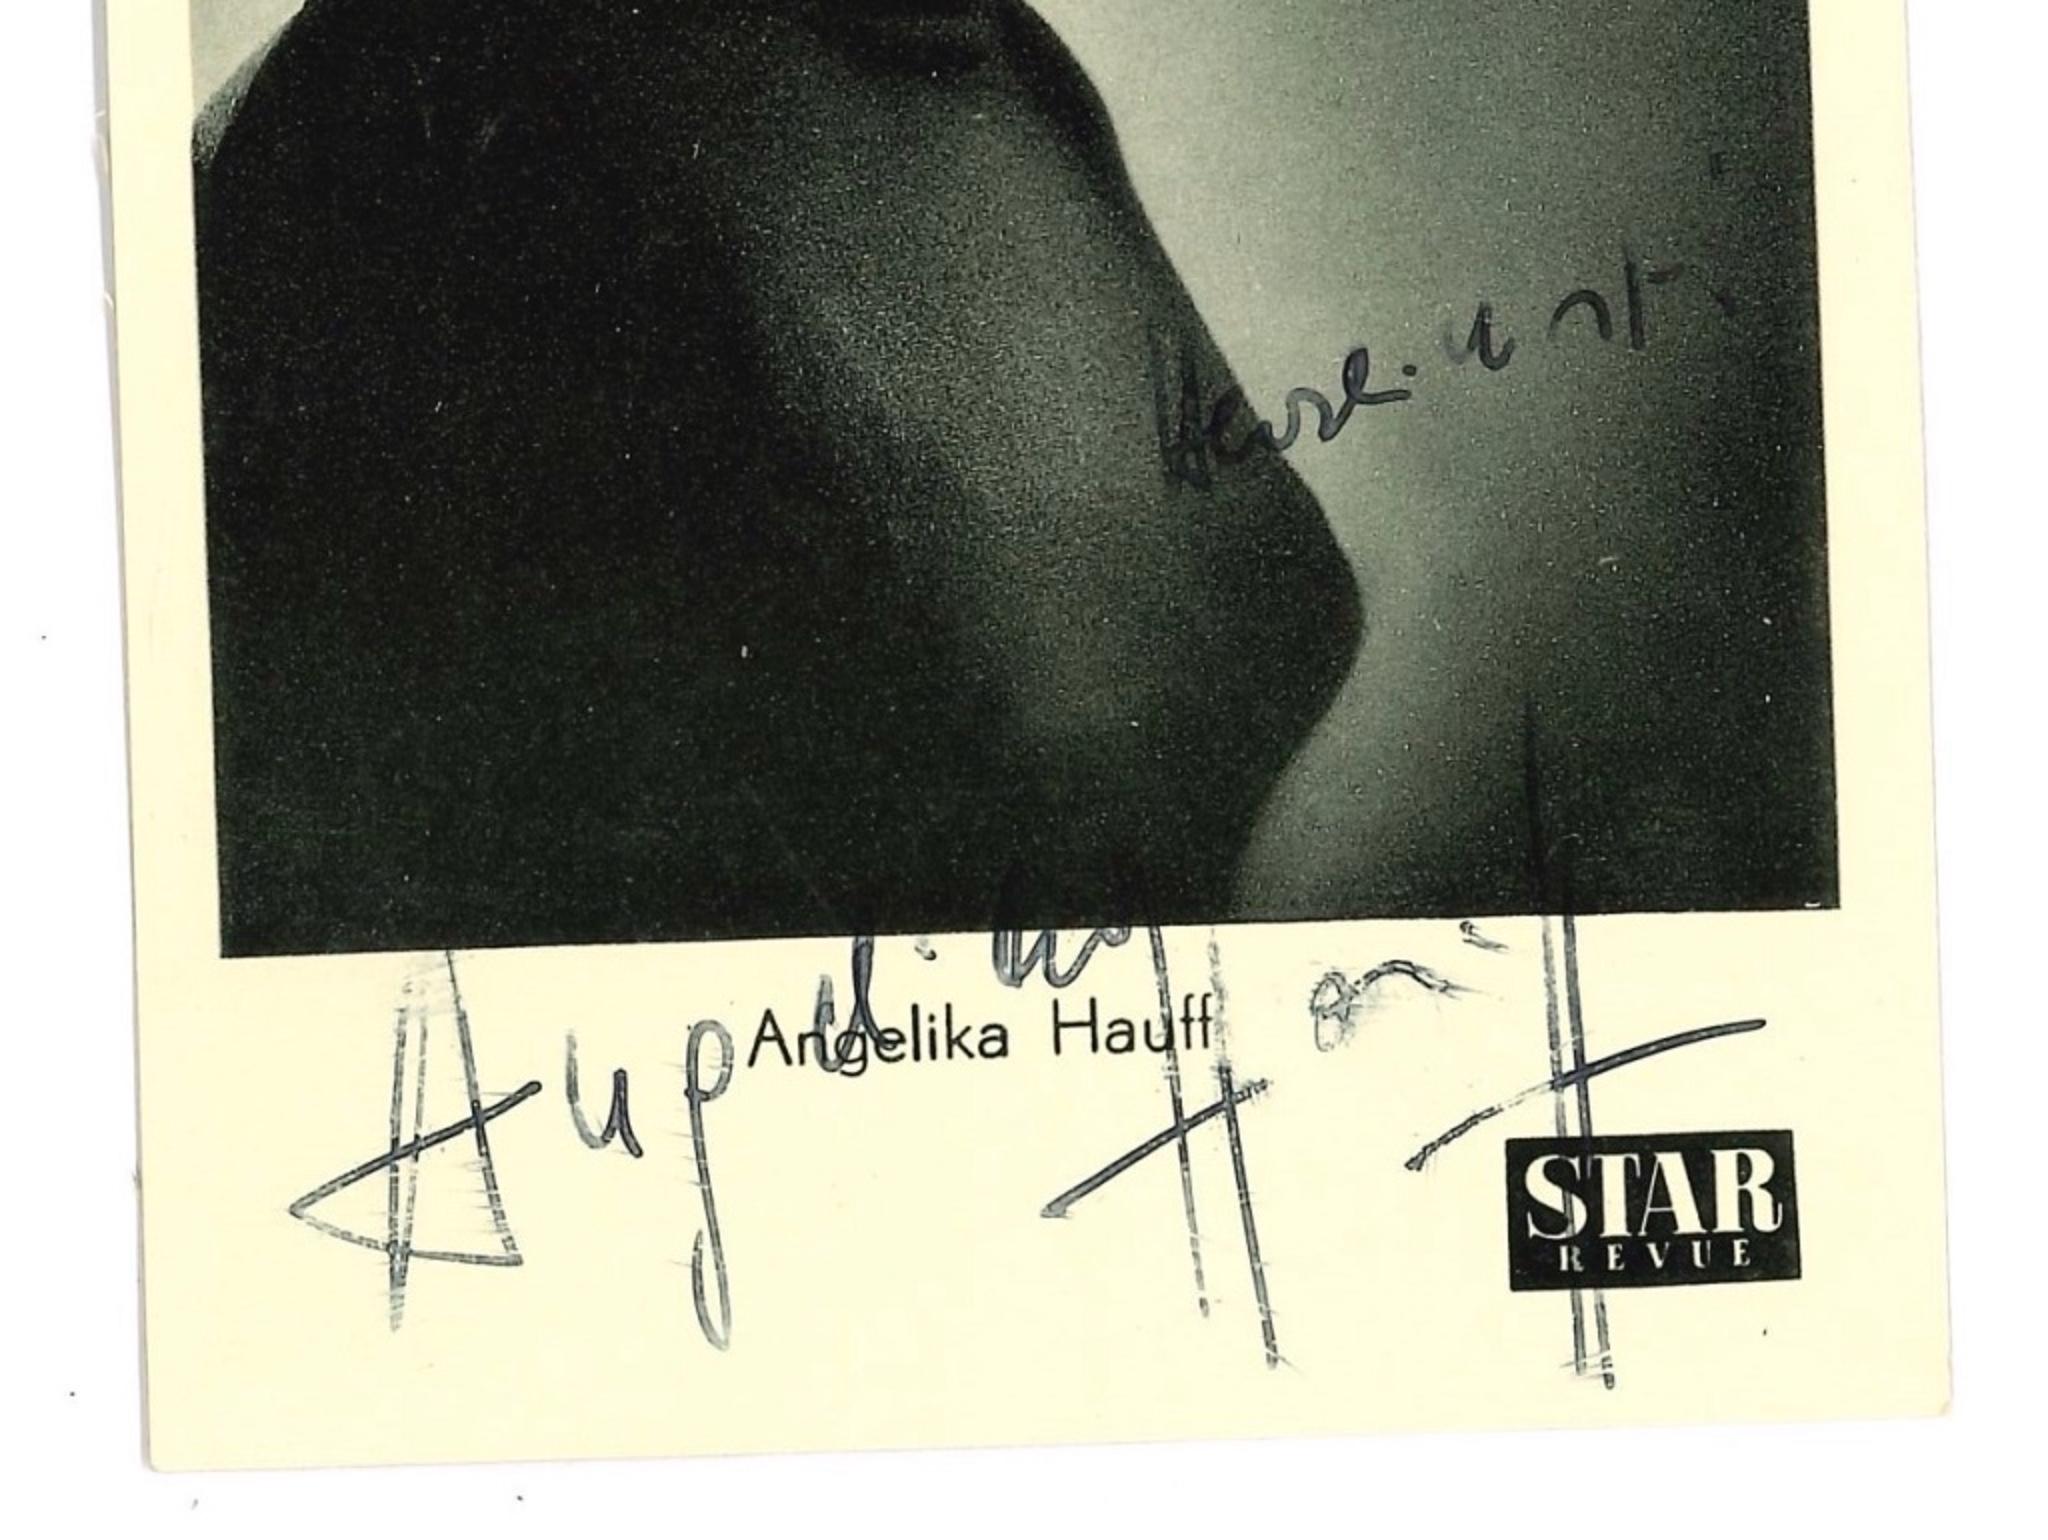 Autographed Postcard by Angelica Hauff - 1960s - Photograph by Unknown